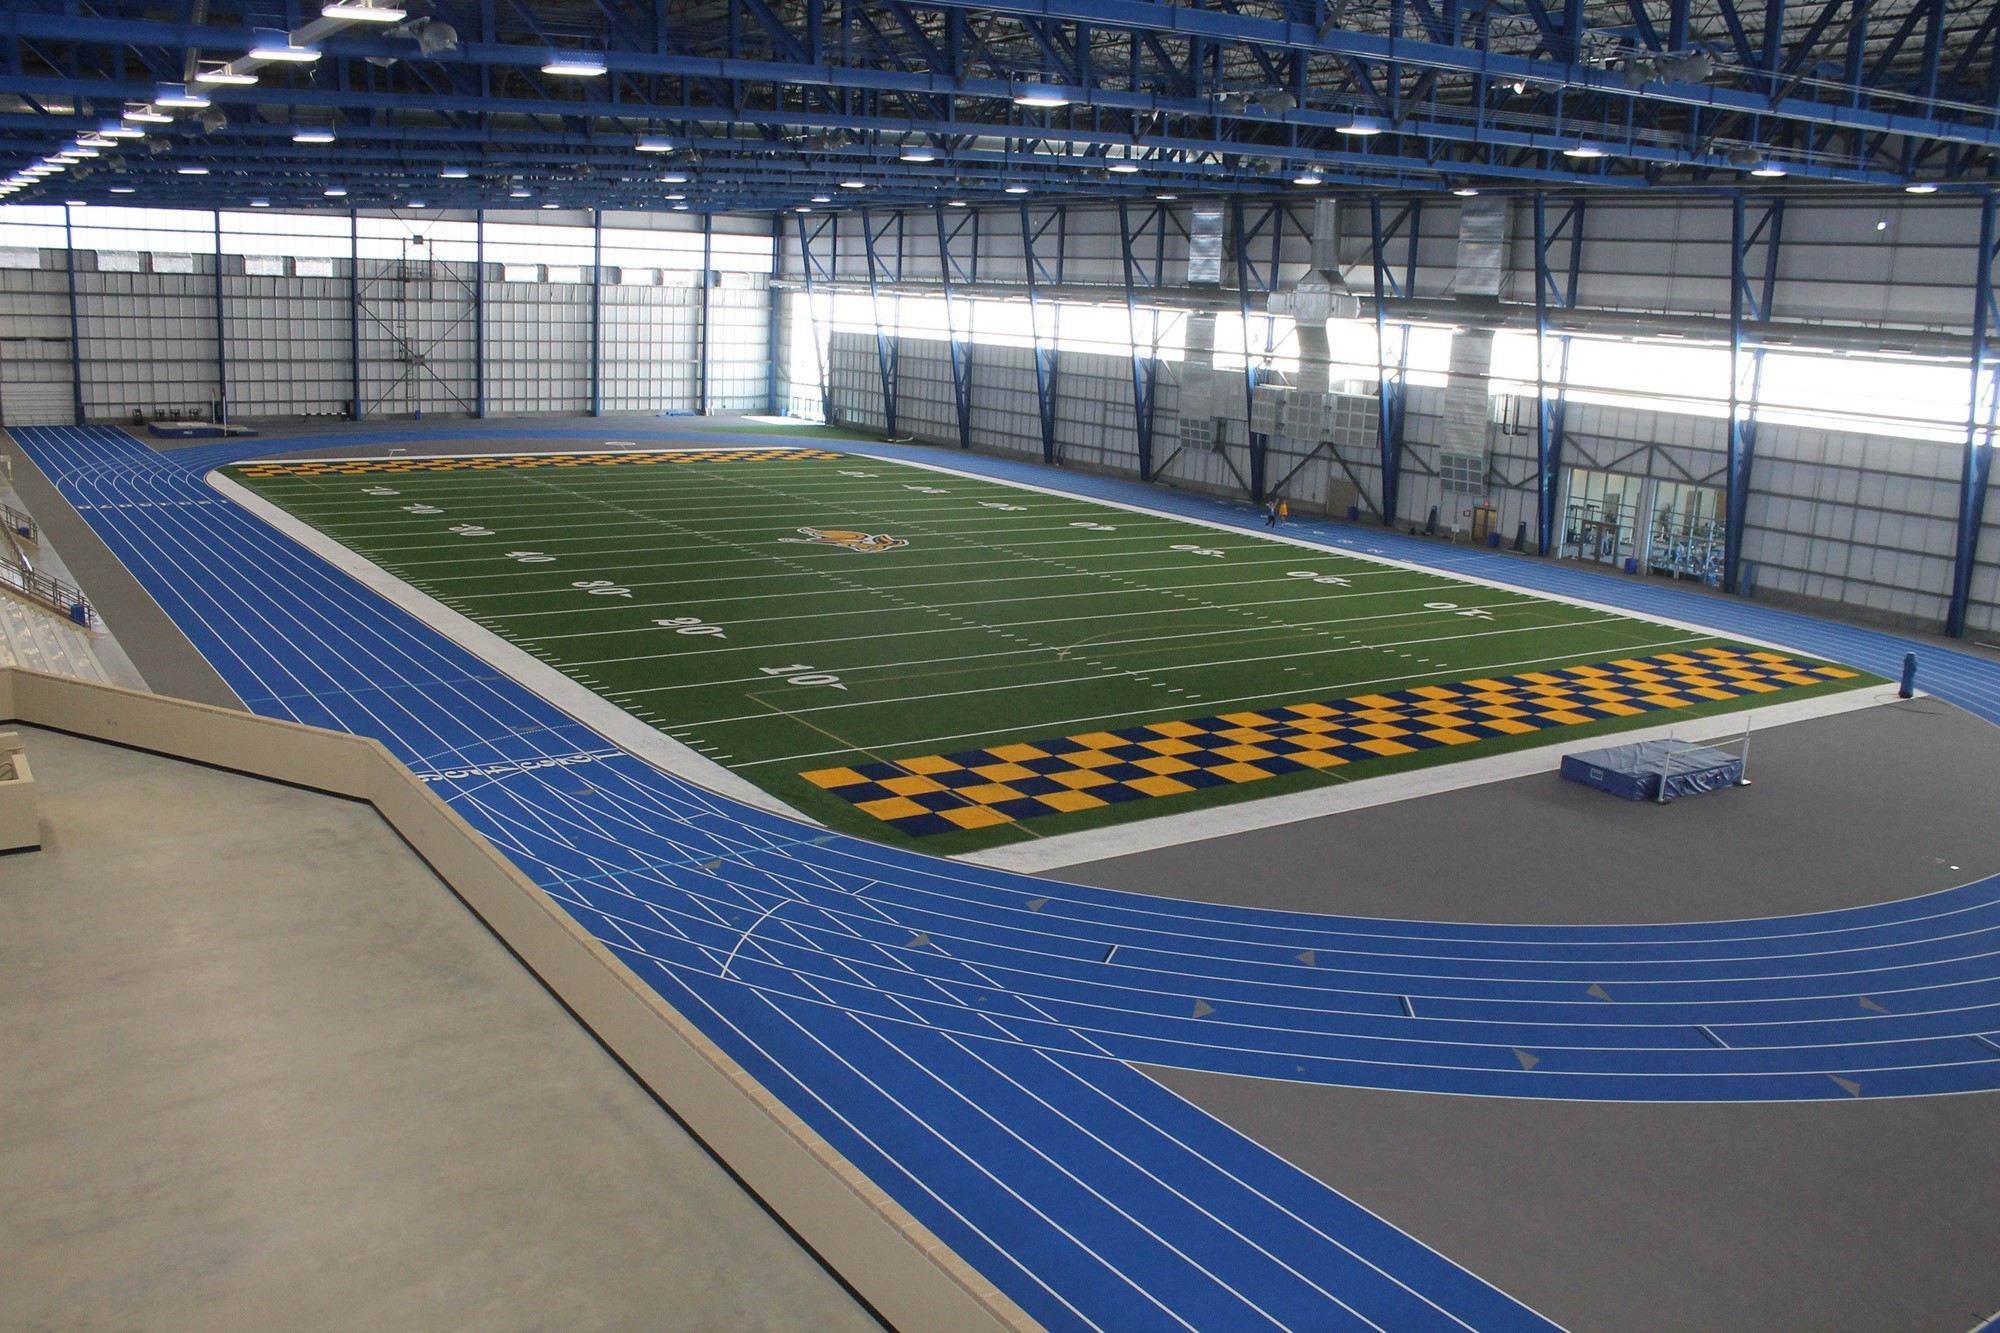 Dakota State (S.D.) to be next Host of Indoor Track & Field National Championships